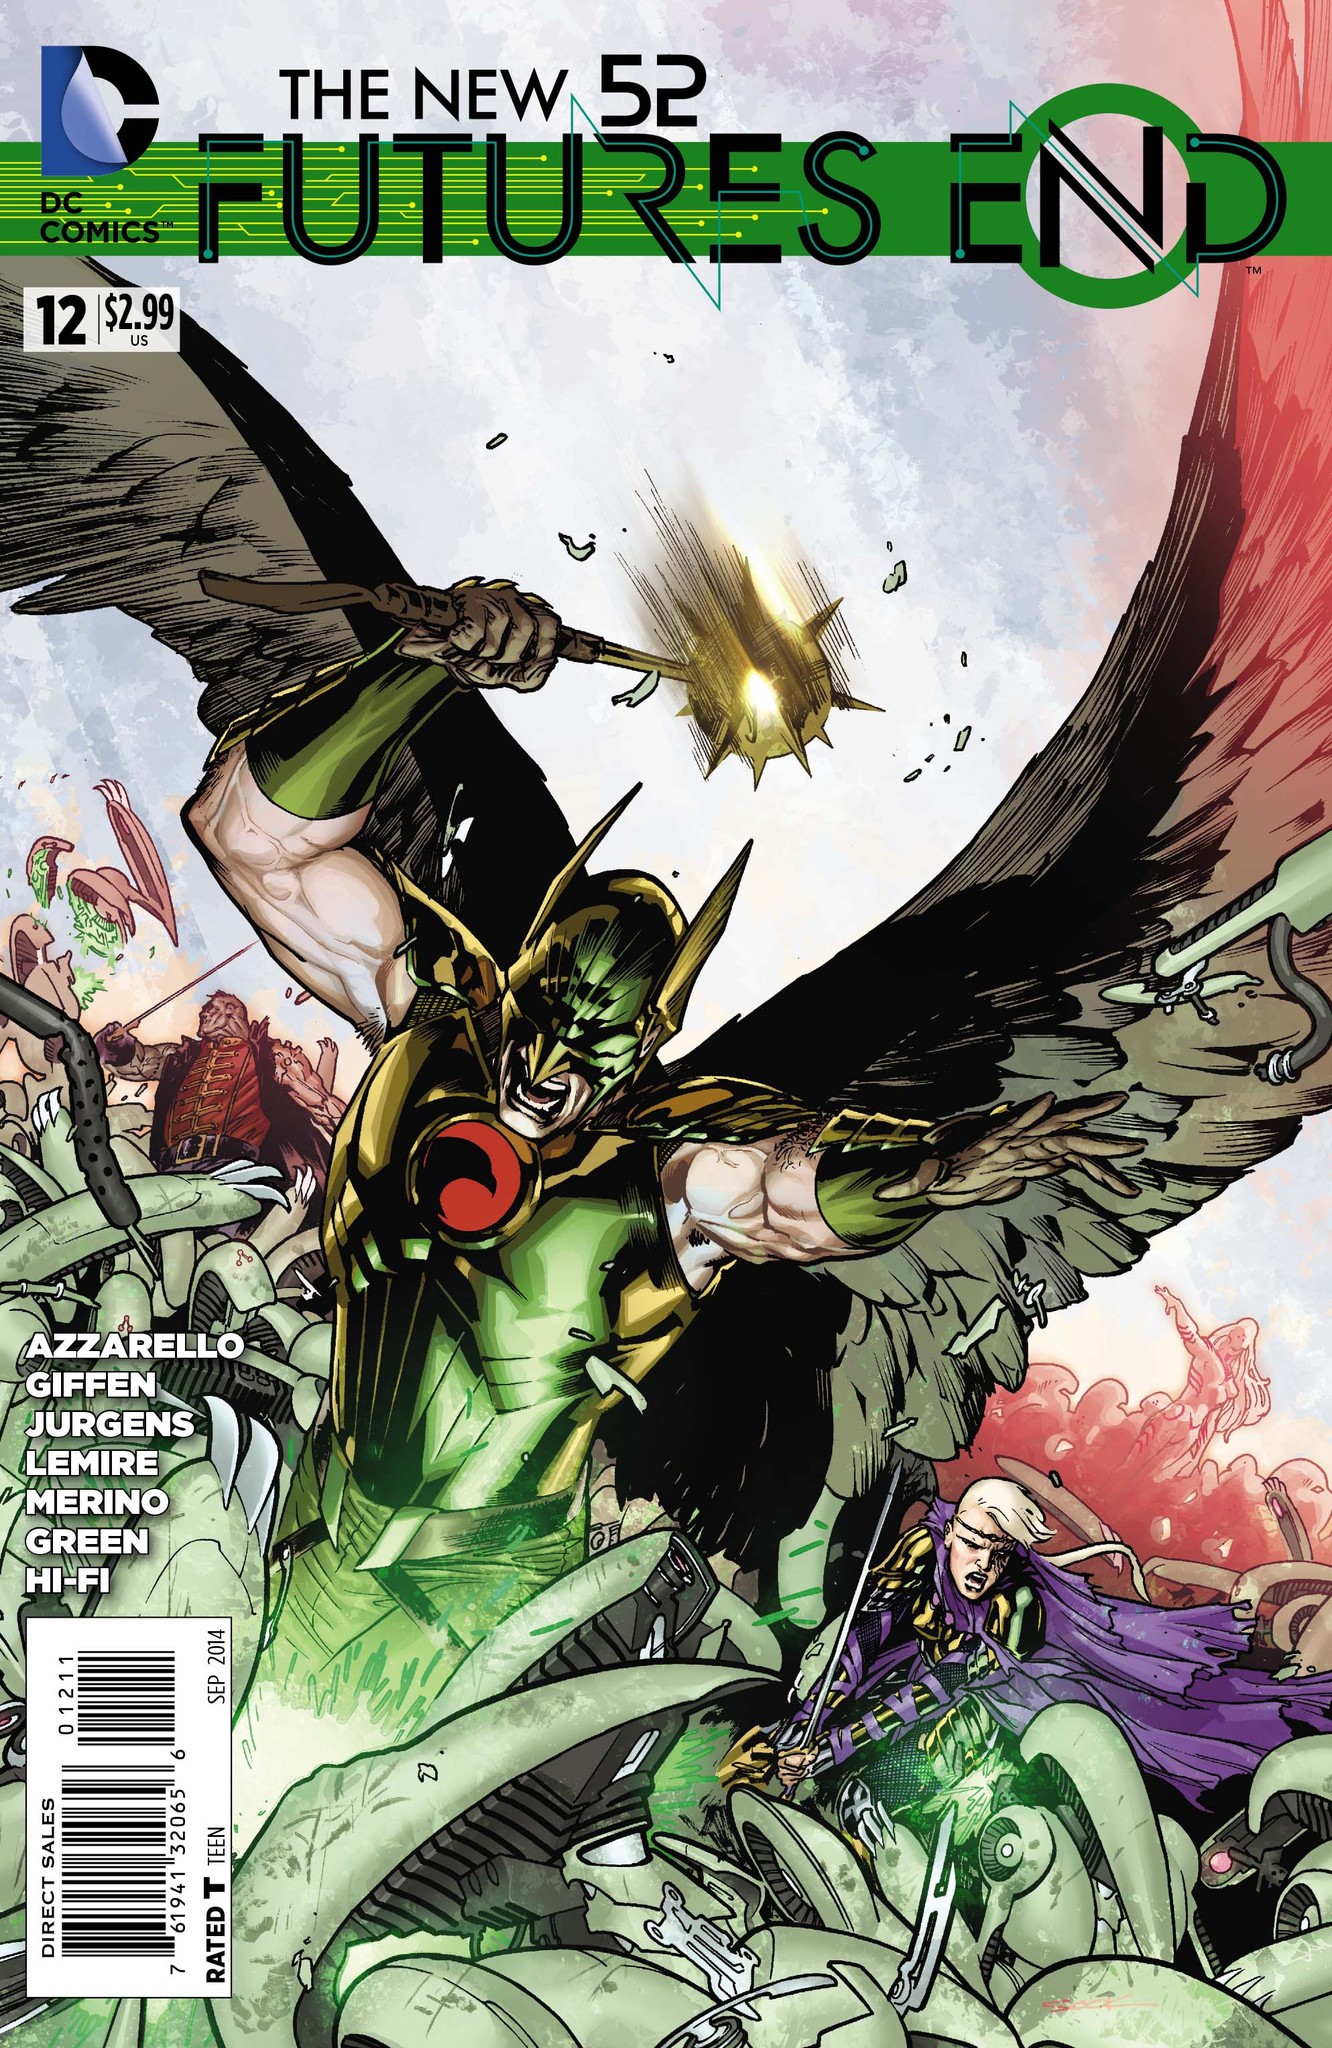 The New 52: Futures End Vol. 1 #12